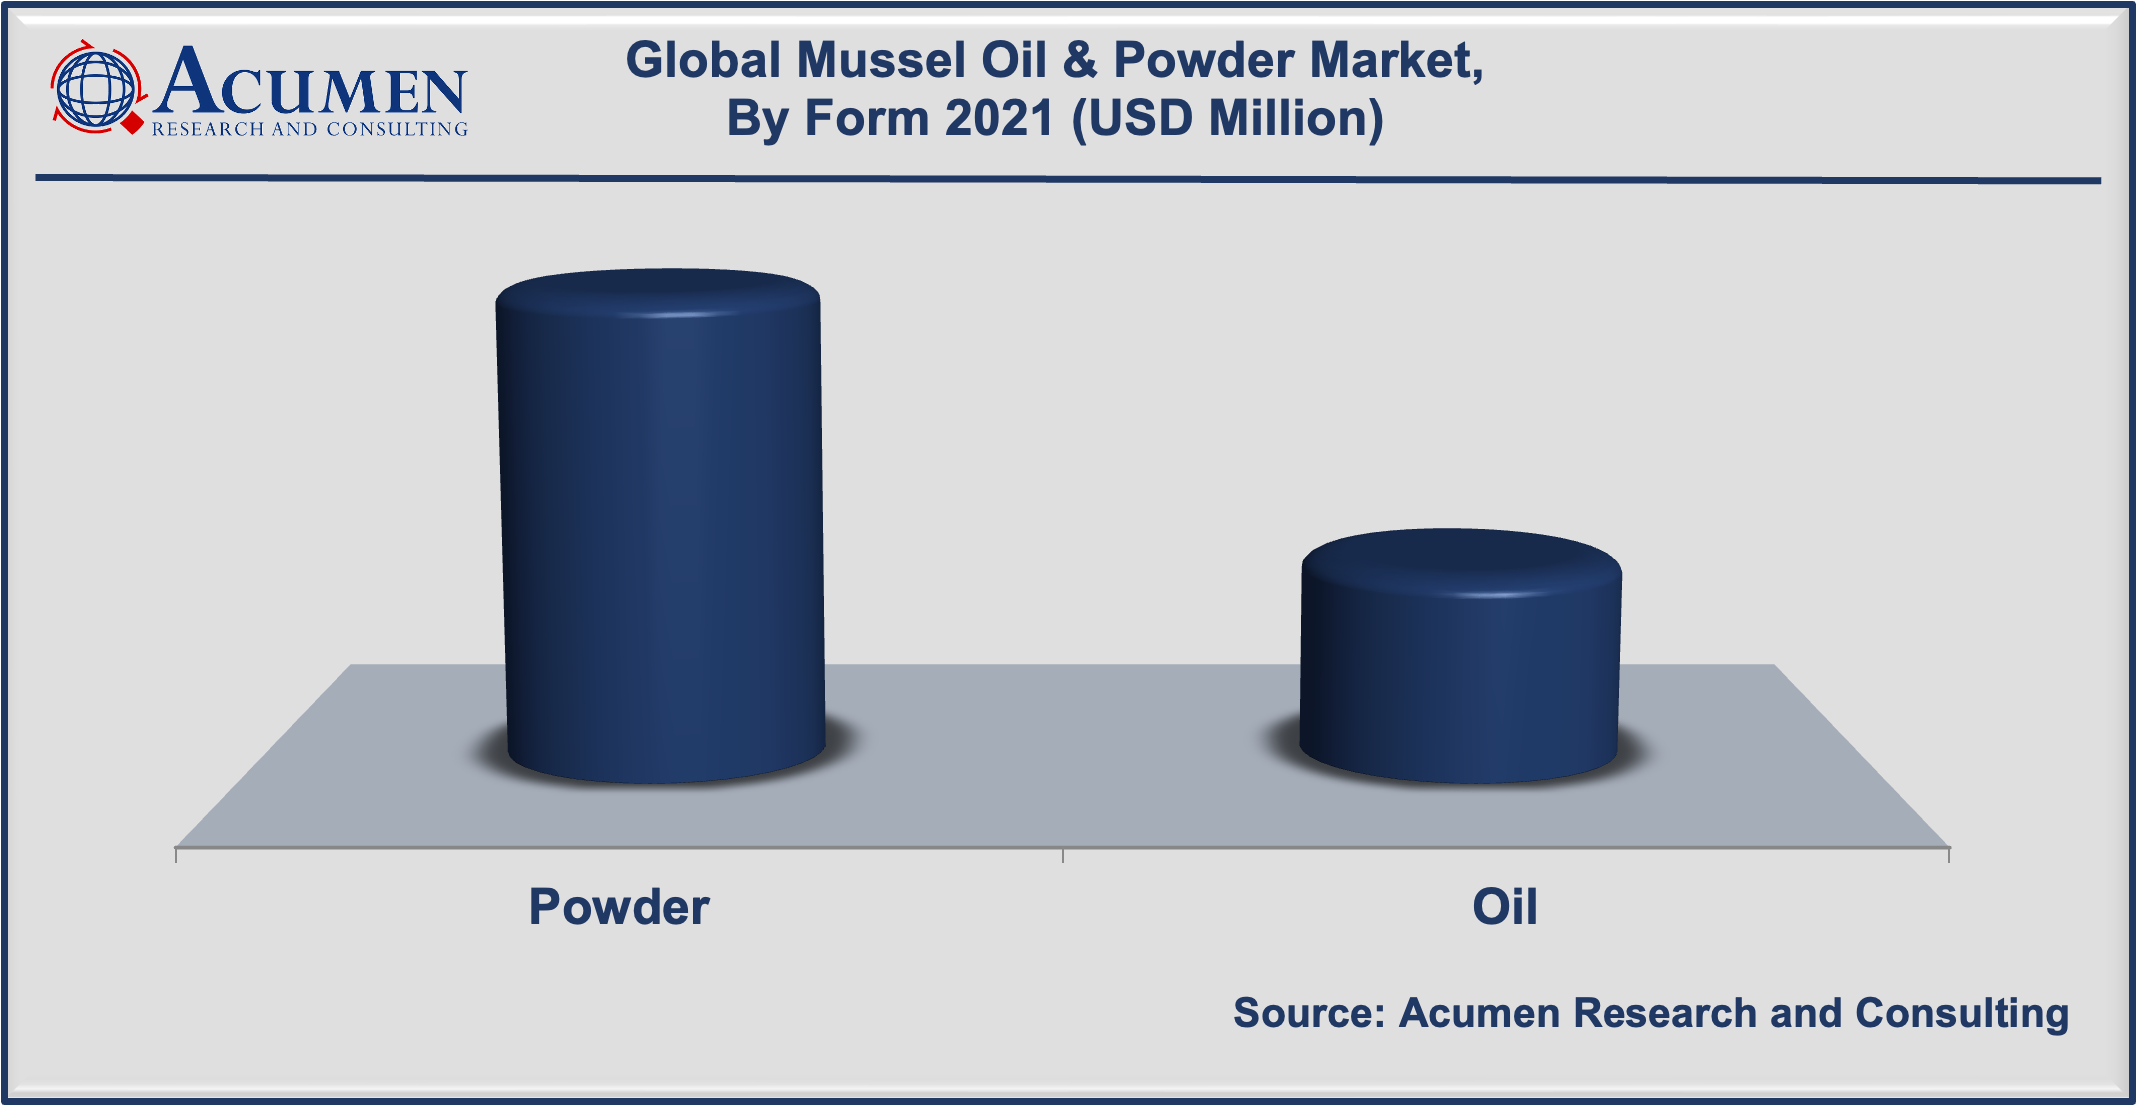 Mussel Oil & Powder Market Share accounted for USD 166 Million in 2021 and is estimated to reach USD 258 Million by 2030.